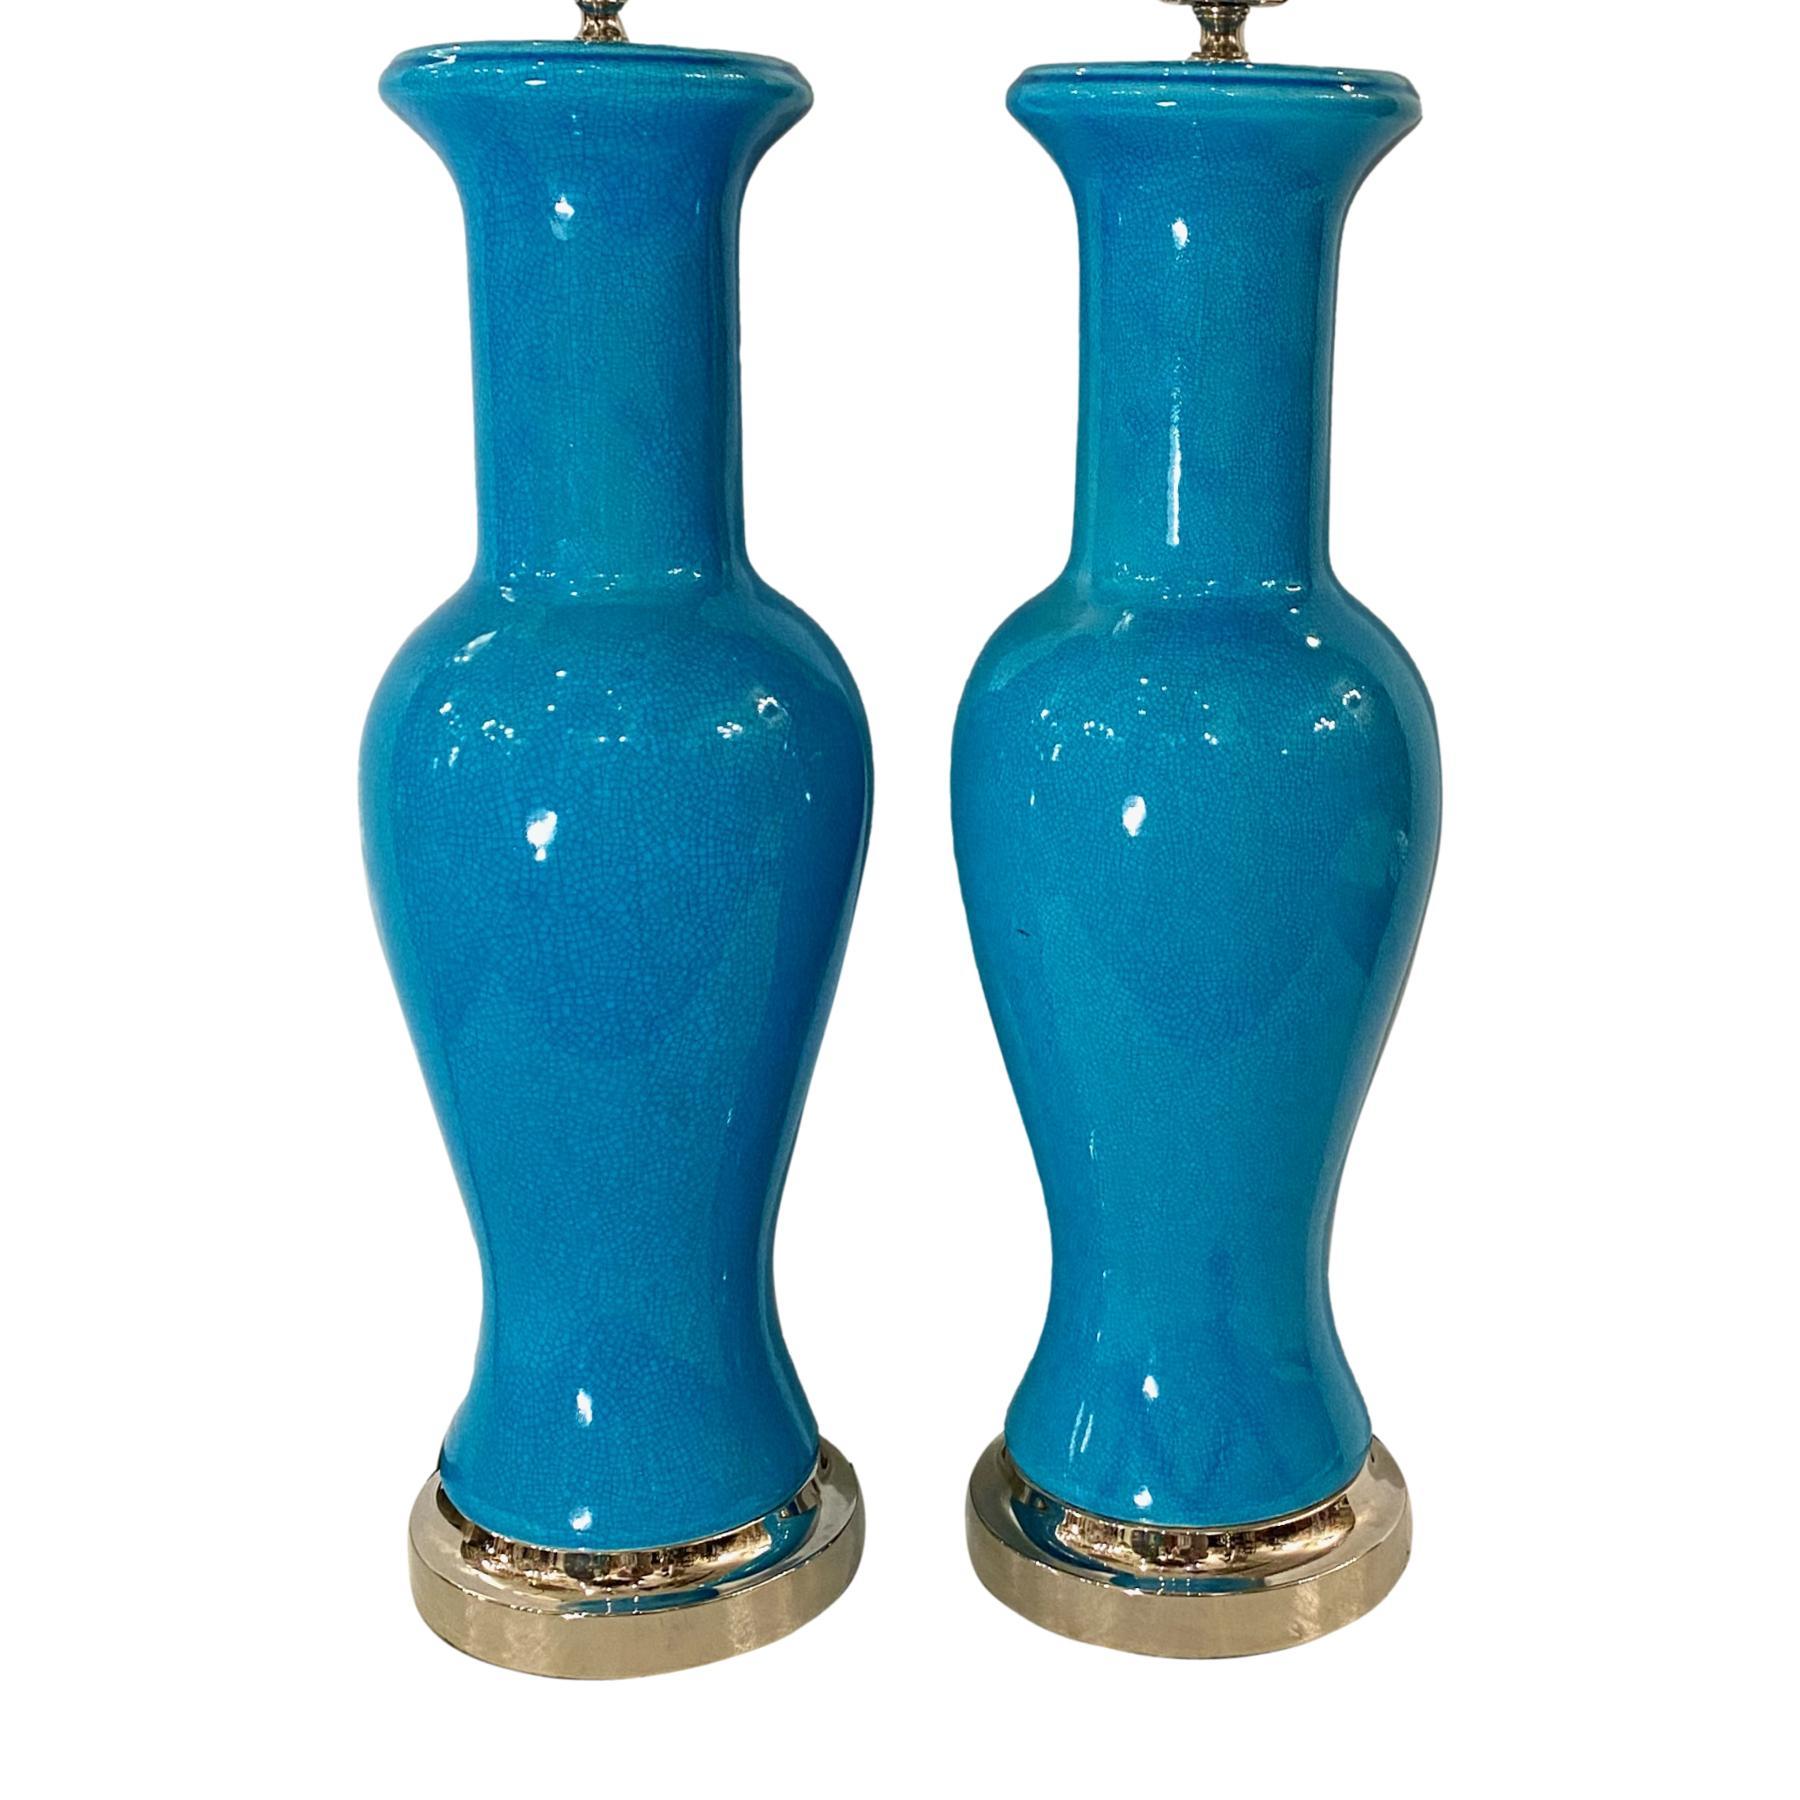 A pair of circa 1940's French vase-shaped turquoise blue crackle-glazed porcelain table lamps with nickel-plated bases.

Measurements
Height of body: 2o